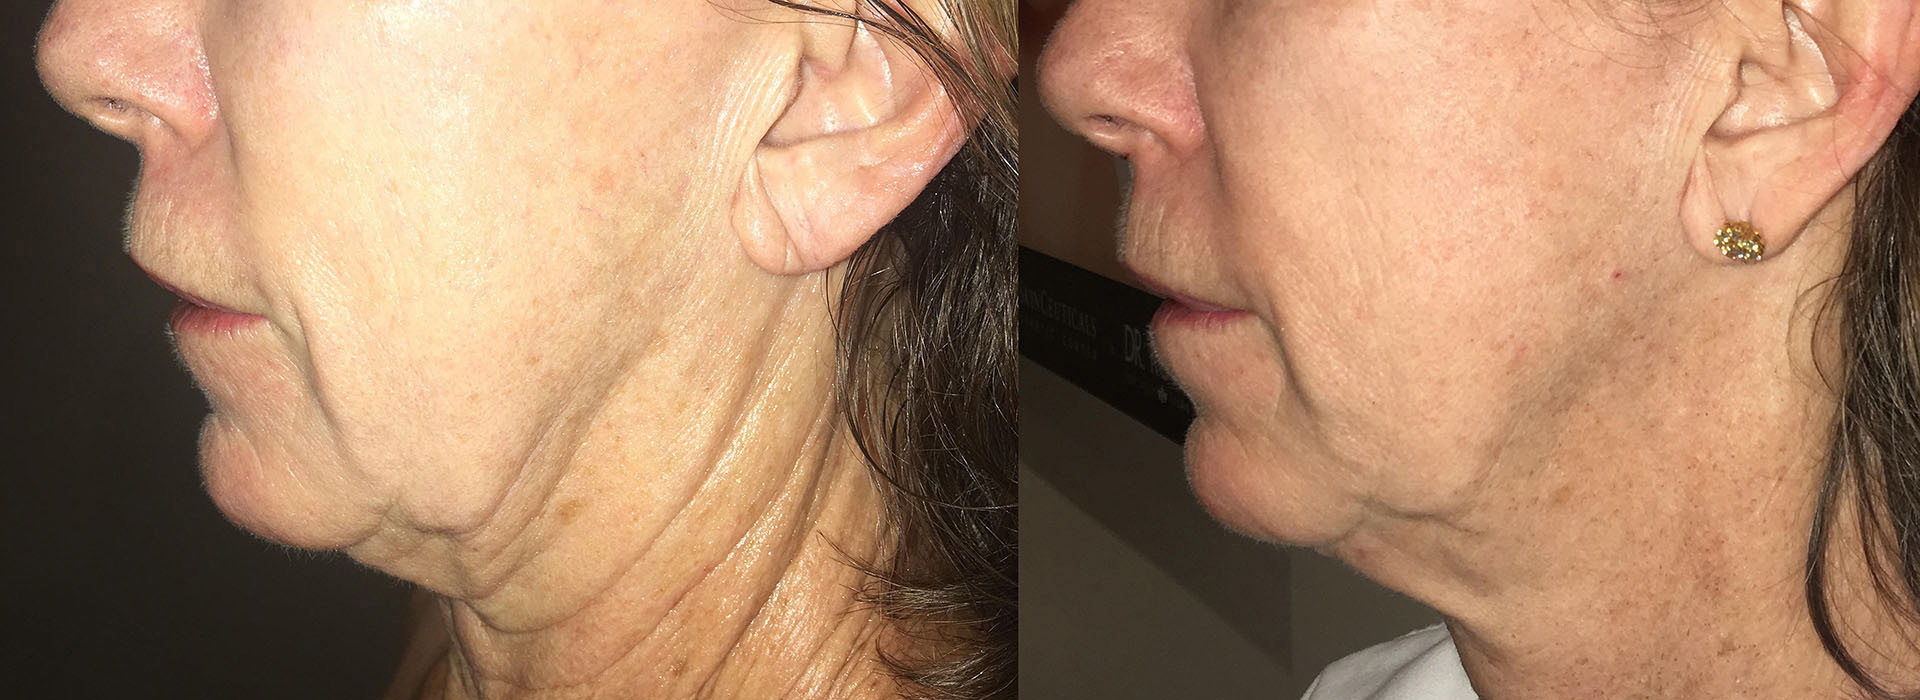 Skin tightening before and after results image